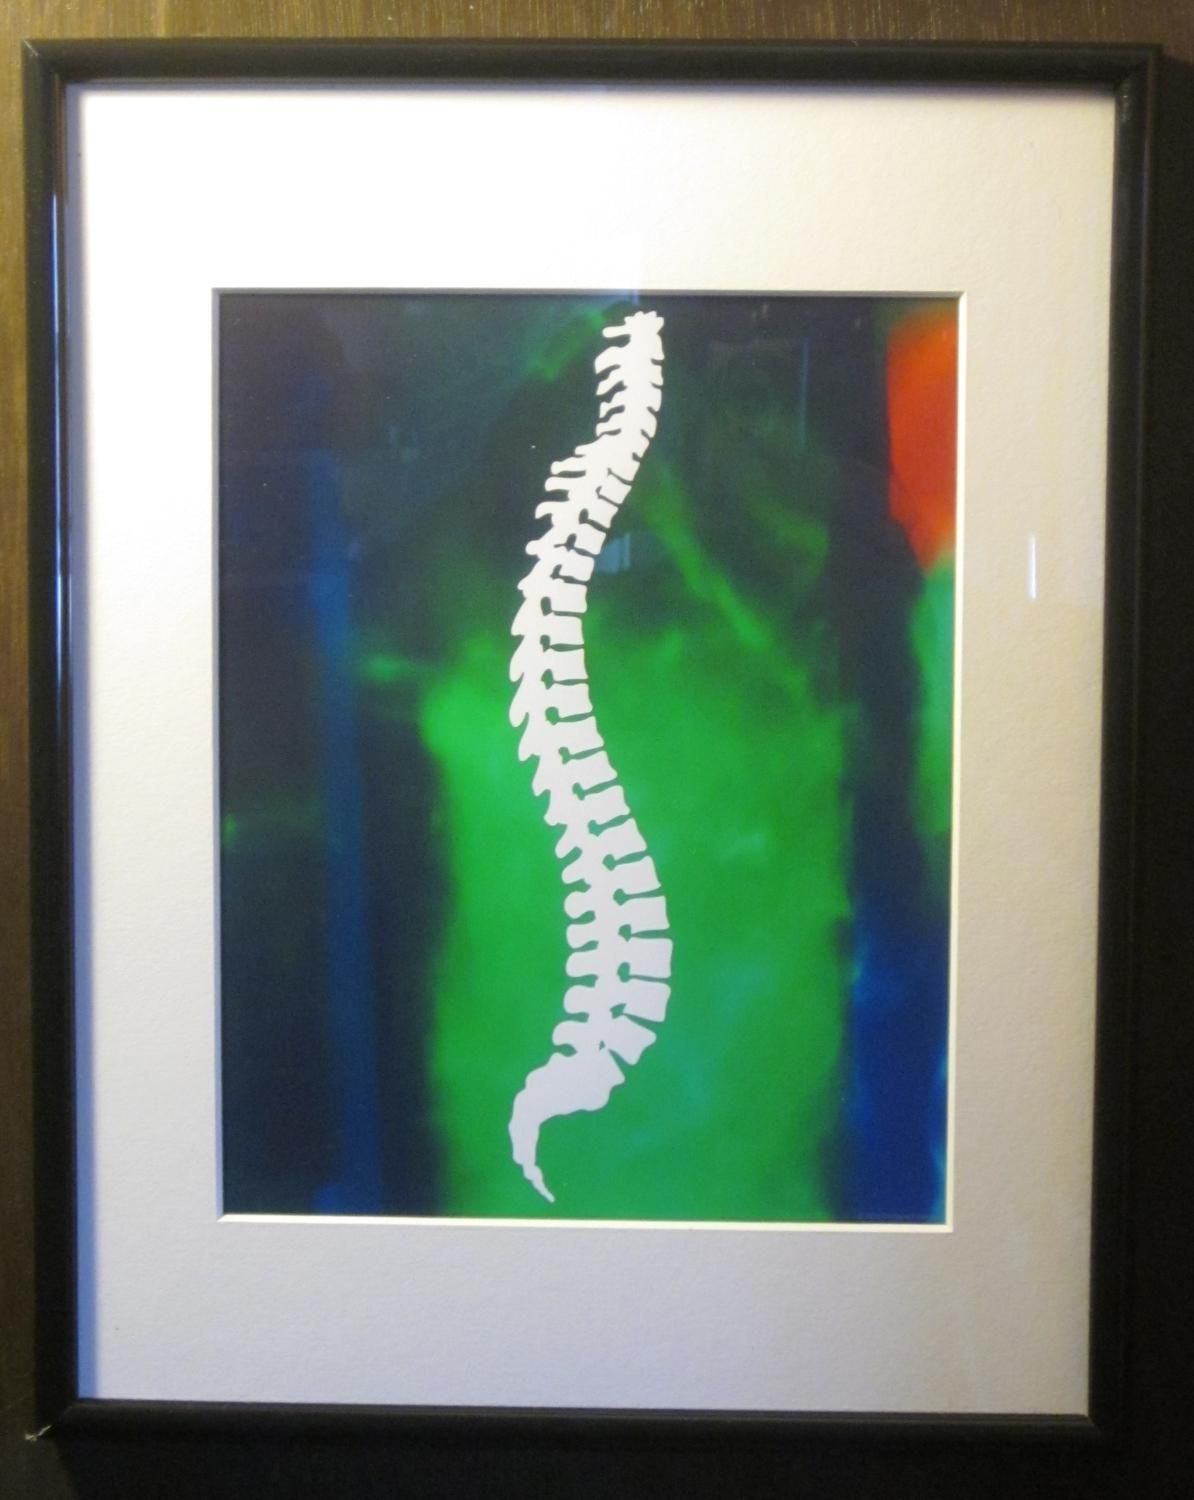 Matted And Framed Chiropractic Spine Silhouette Print Intended For Chiropractic Wall Art (View 14 of 20)